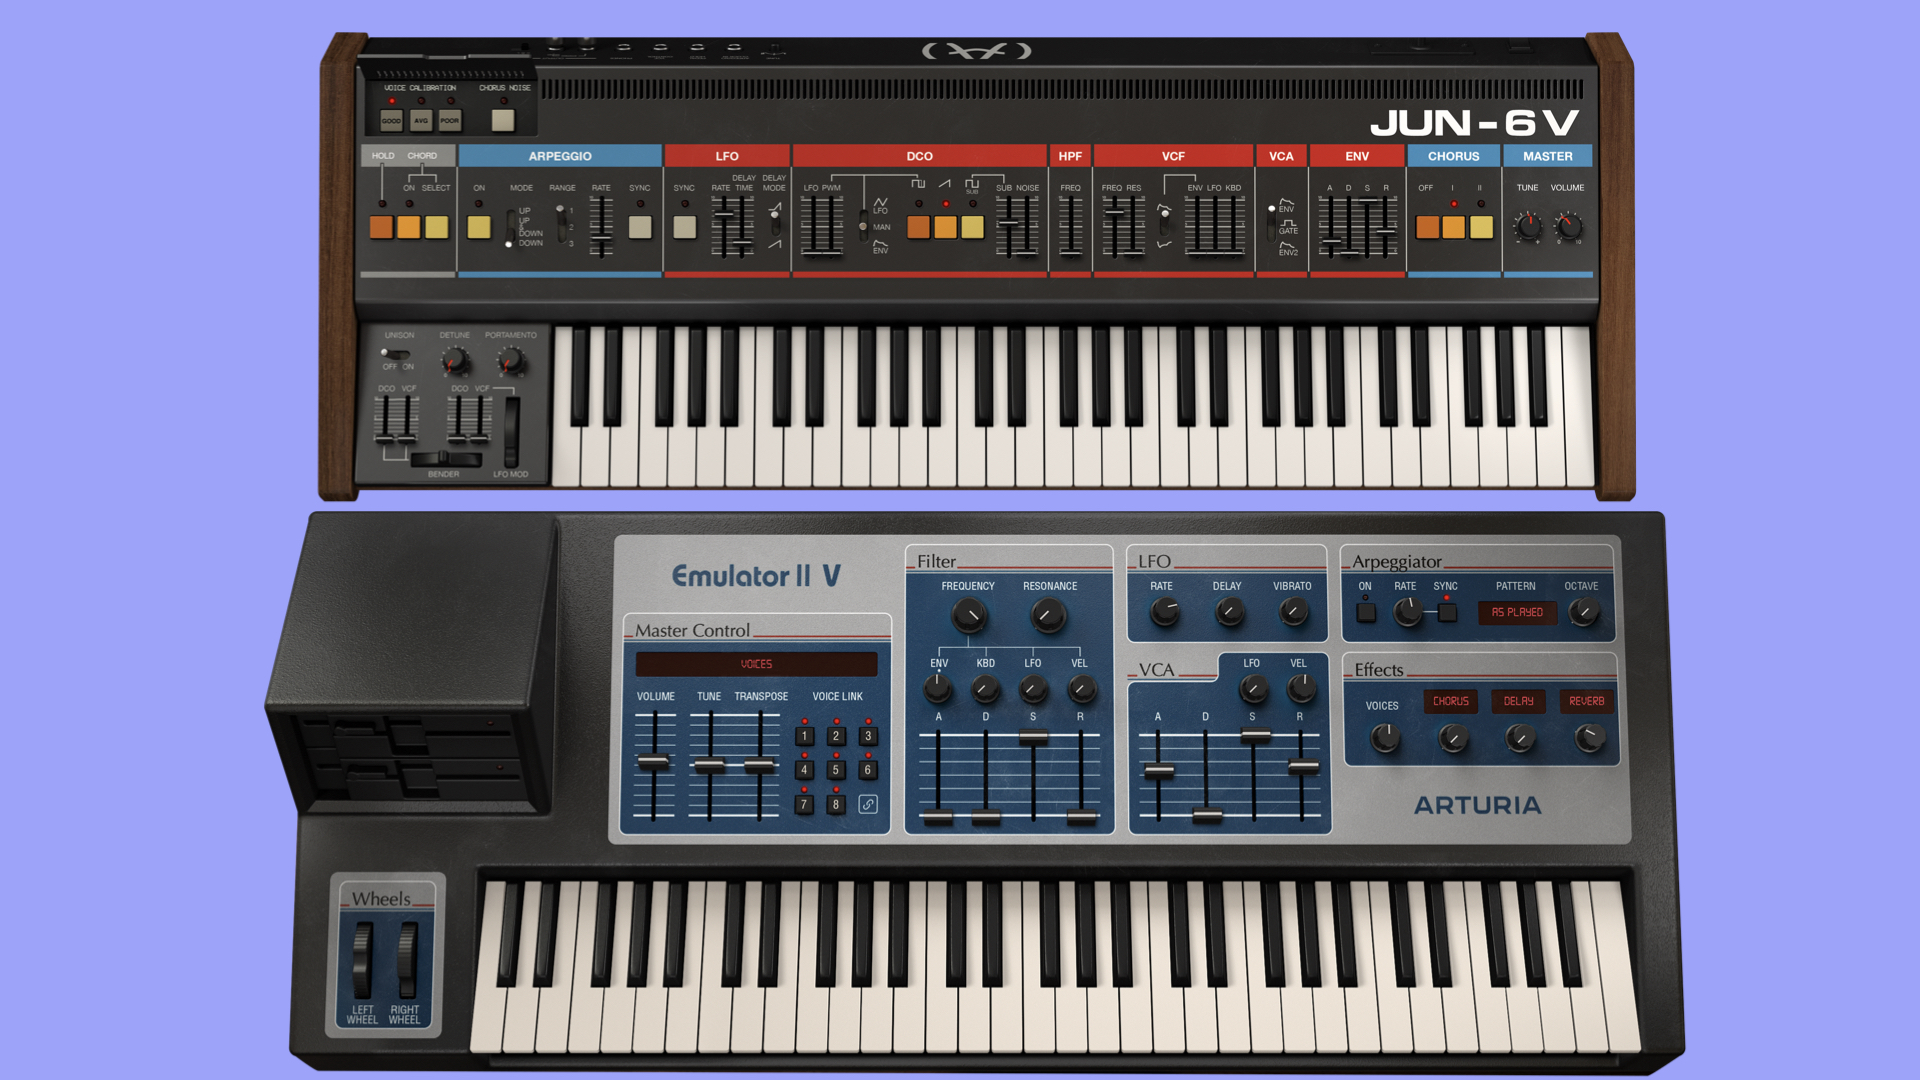 ❕ Arturia Synth Collection 2021.1 + Activator Application Full ((EXCLUSIVE)) Version